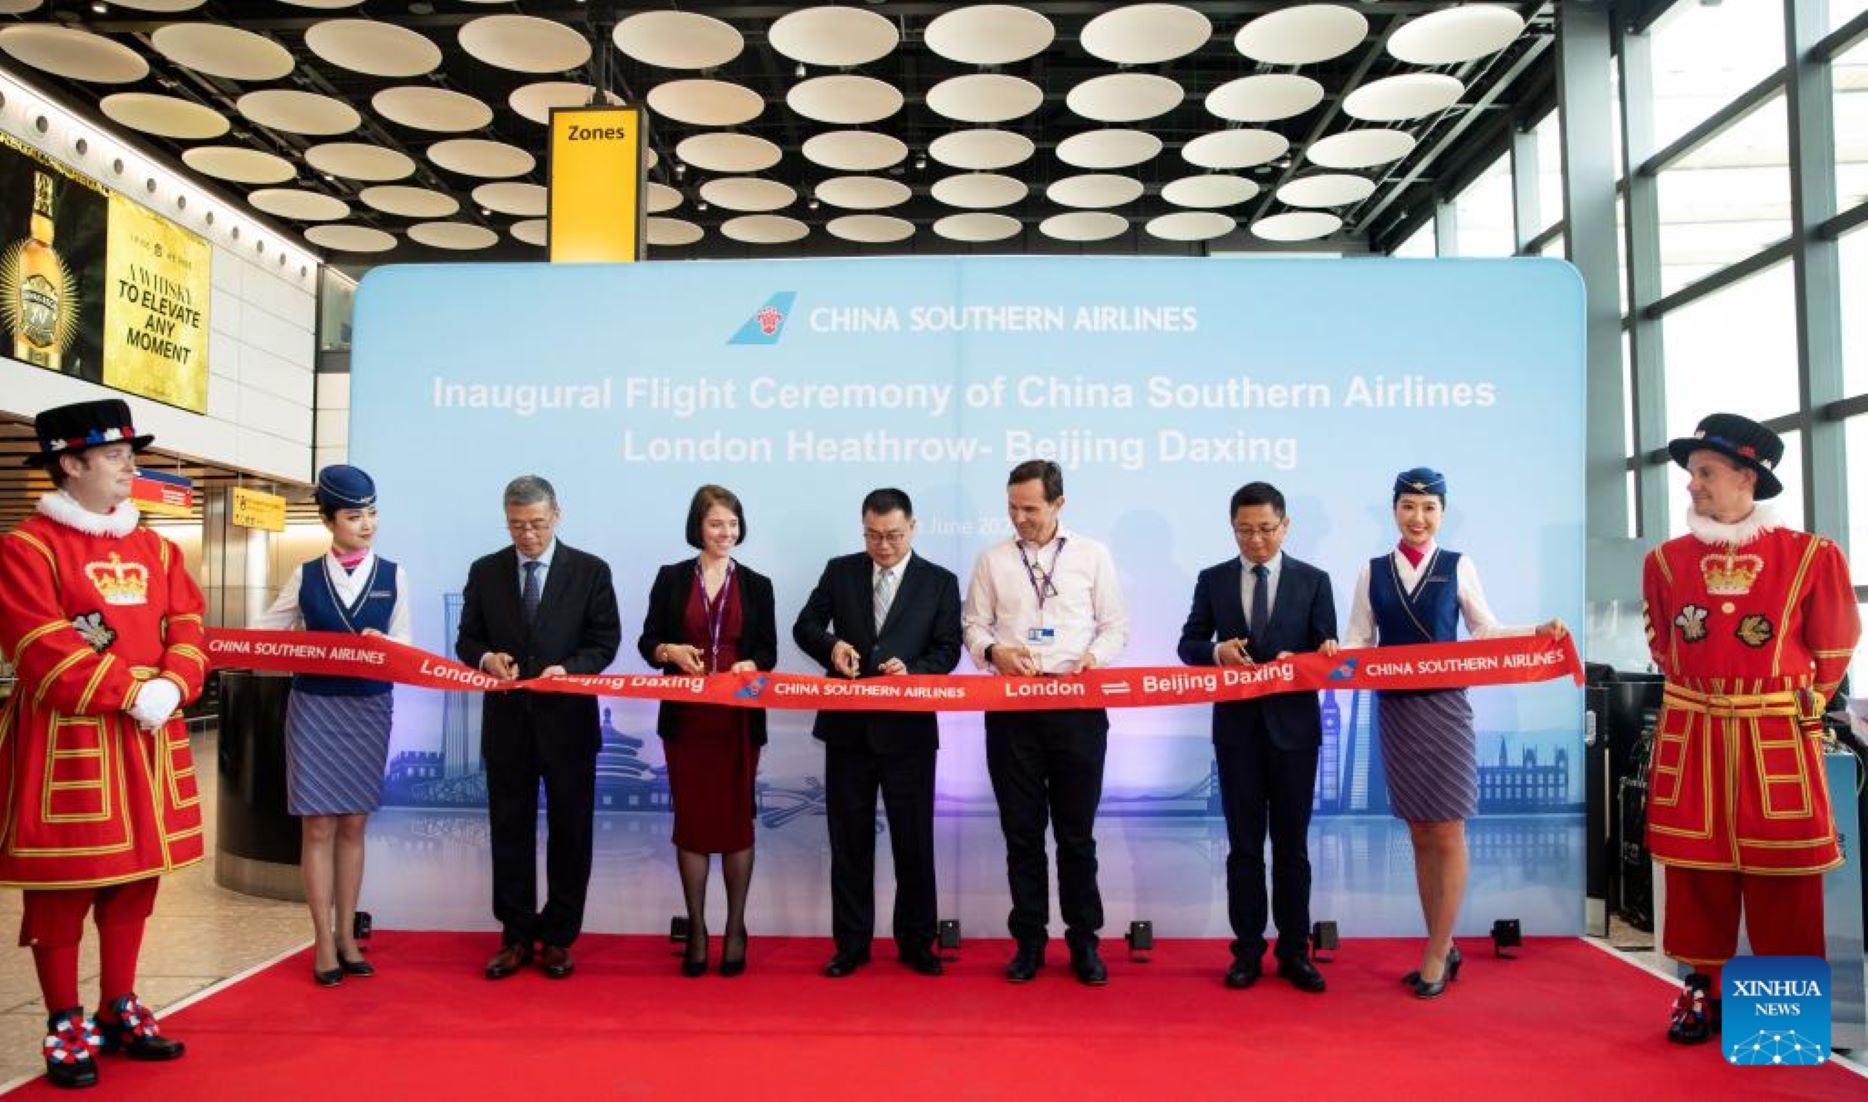 Chinese Airline Launched New Direct Air Route Linking London, Beijing